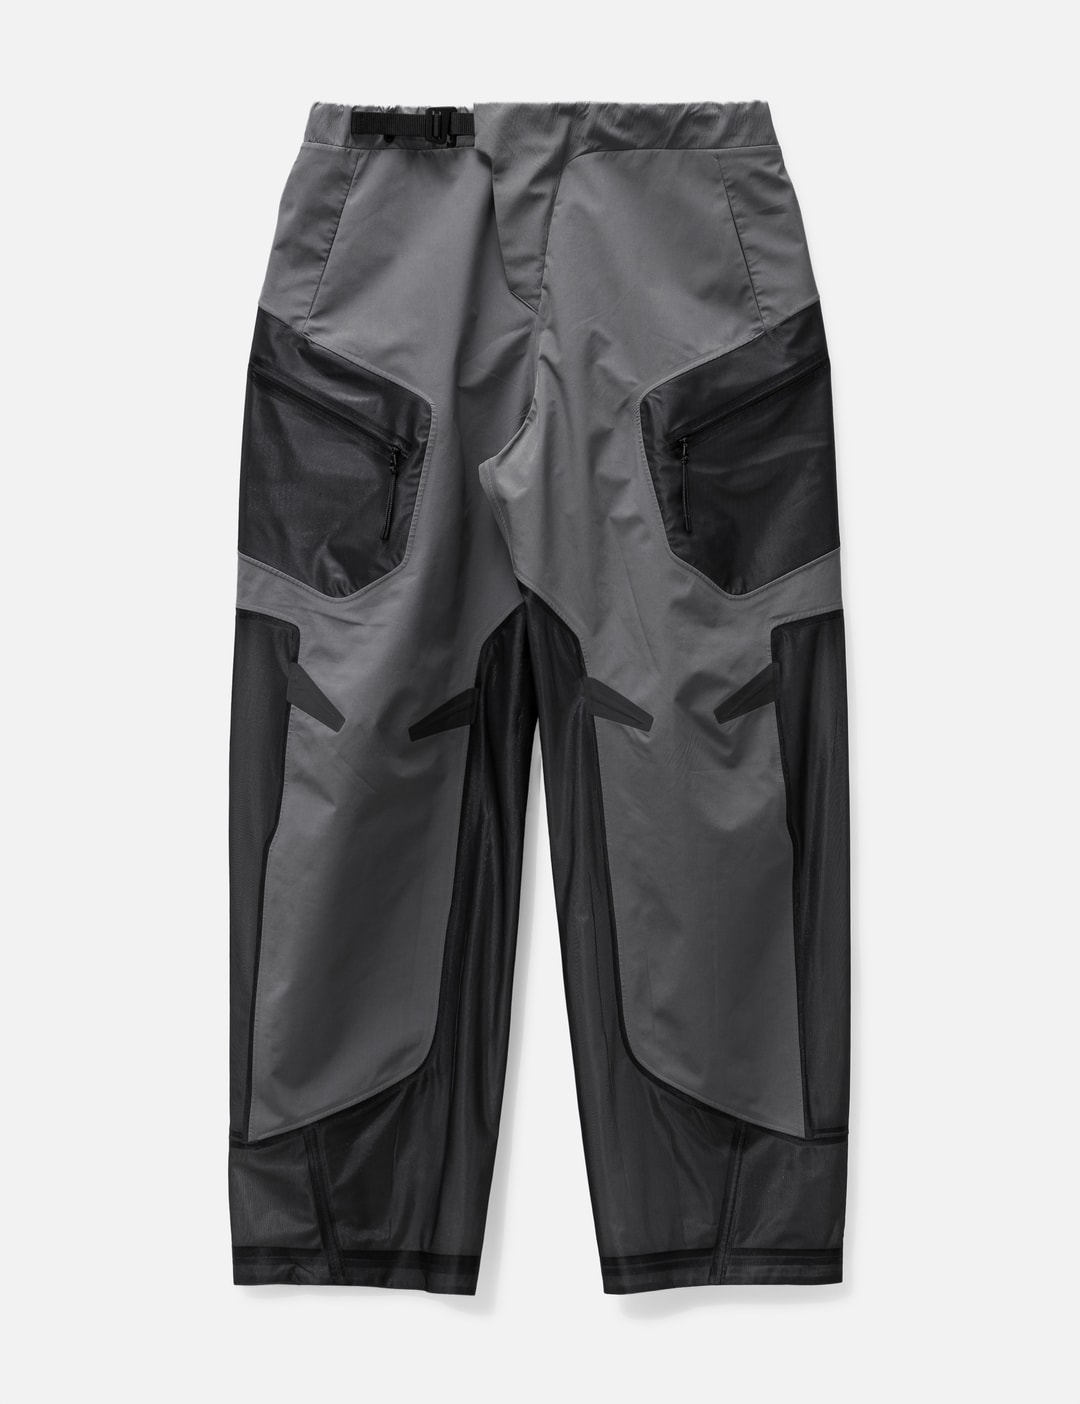 _J.L-A.L_ - CONSTRUCTIVISM PANTS | HBX - Globally Curated Fashion and ...